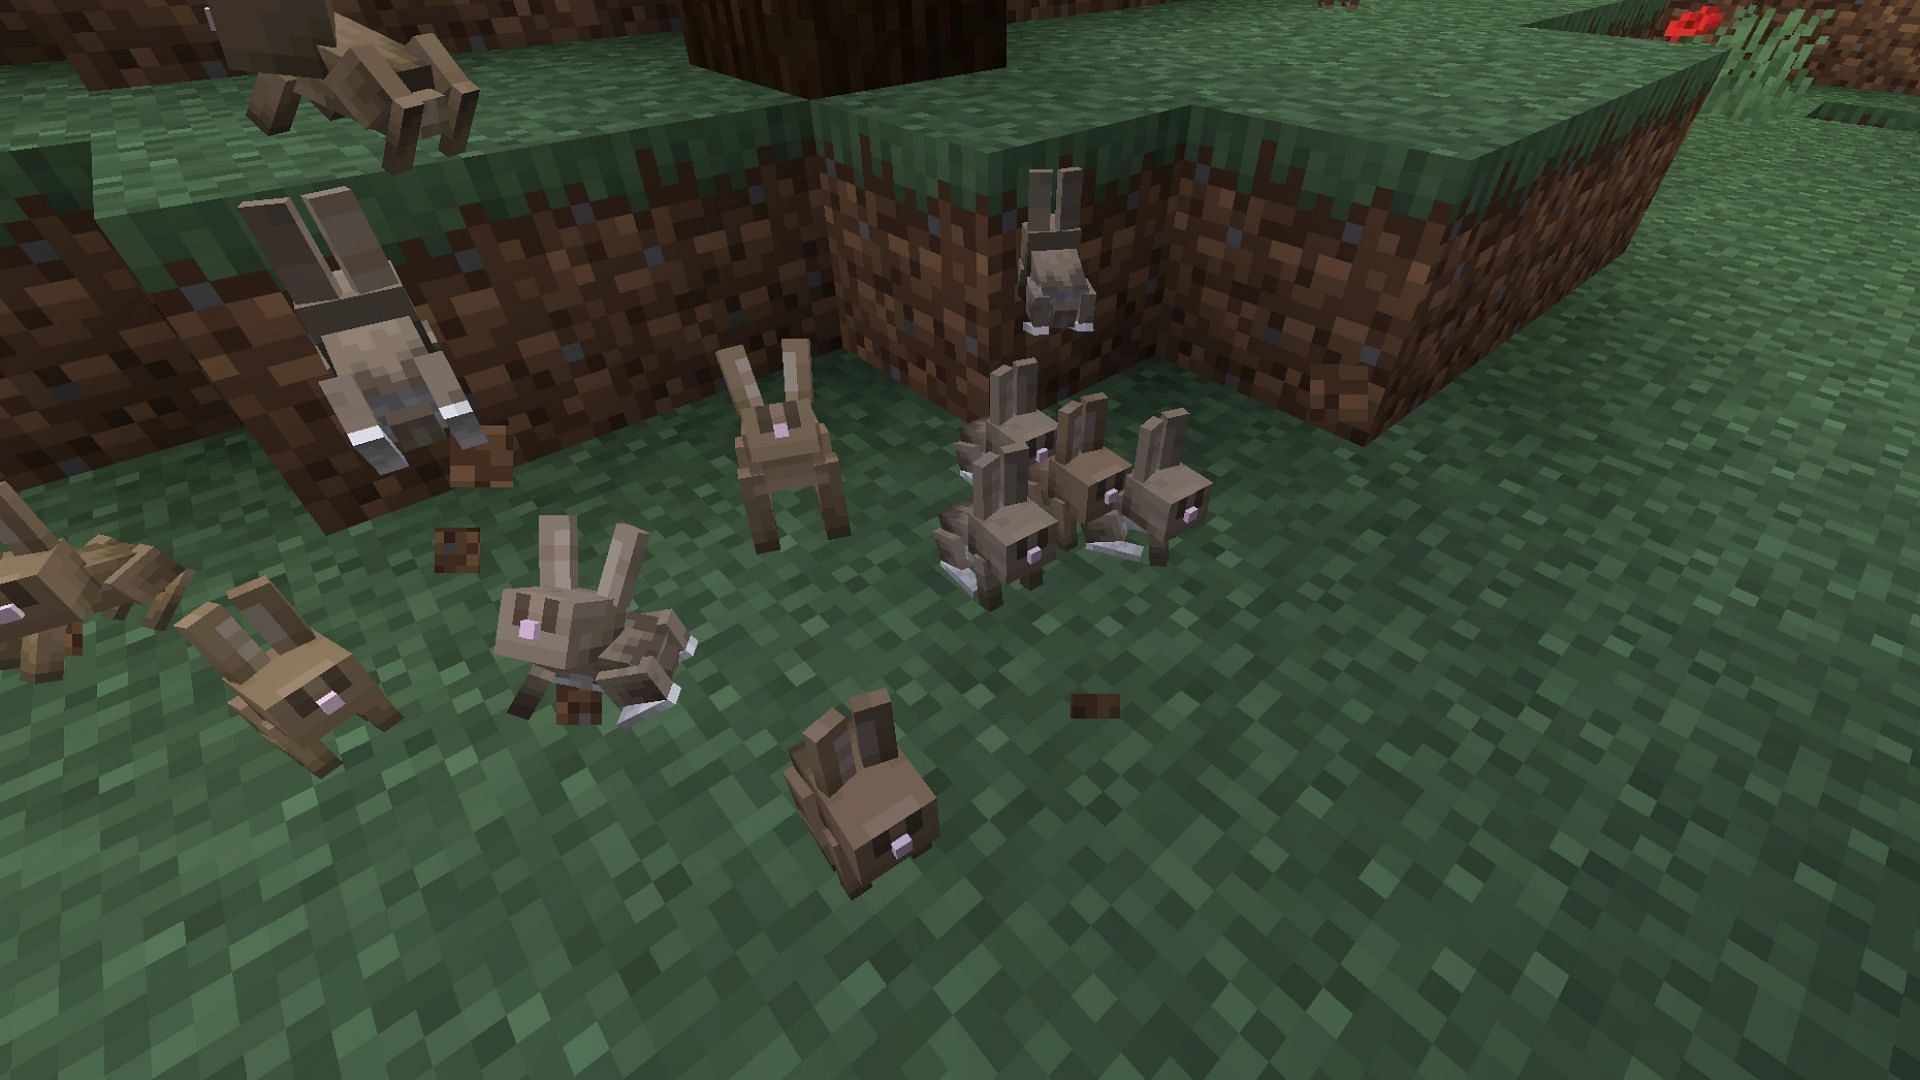 Rabbits can be fed dandelions, carrots, and golden carrots while breeding in Minecraft (Image via Mojang)